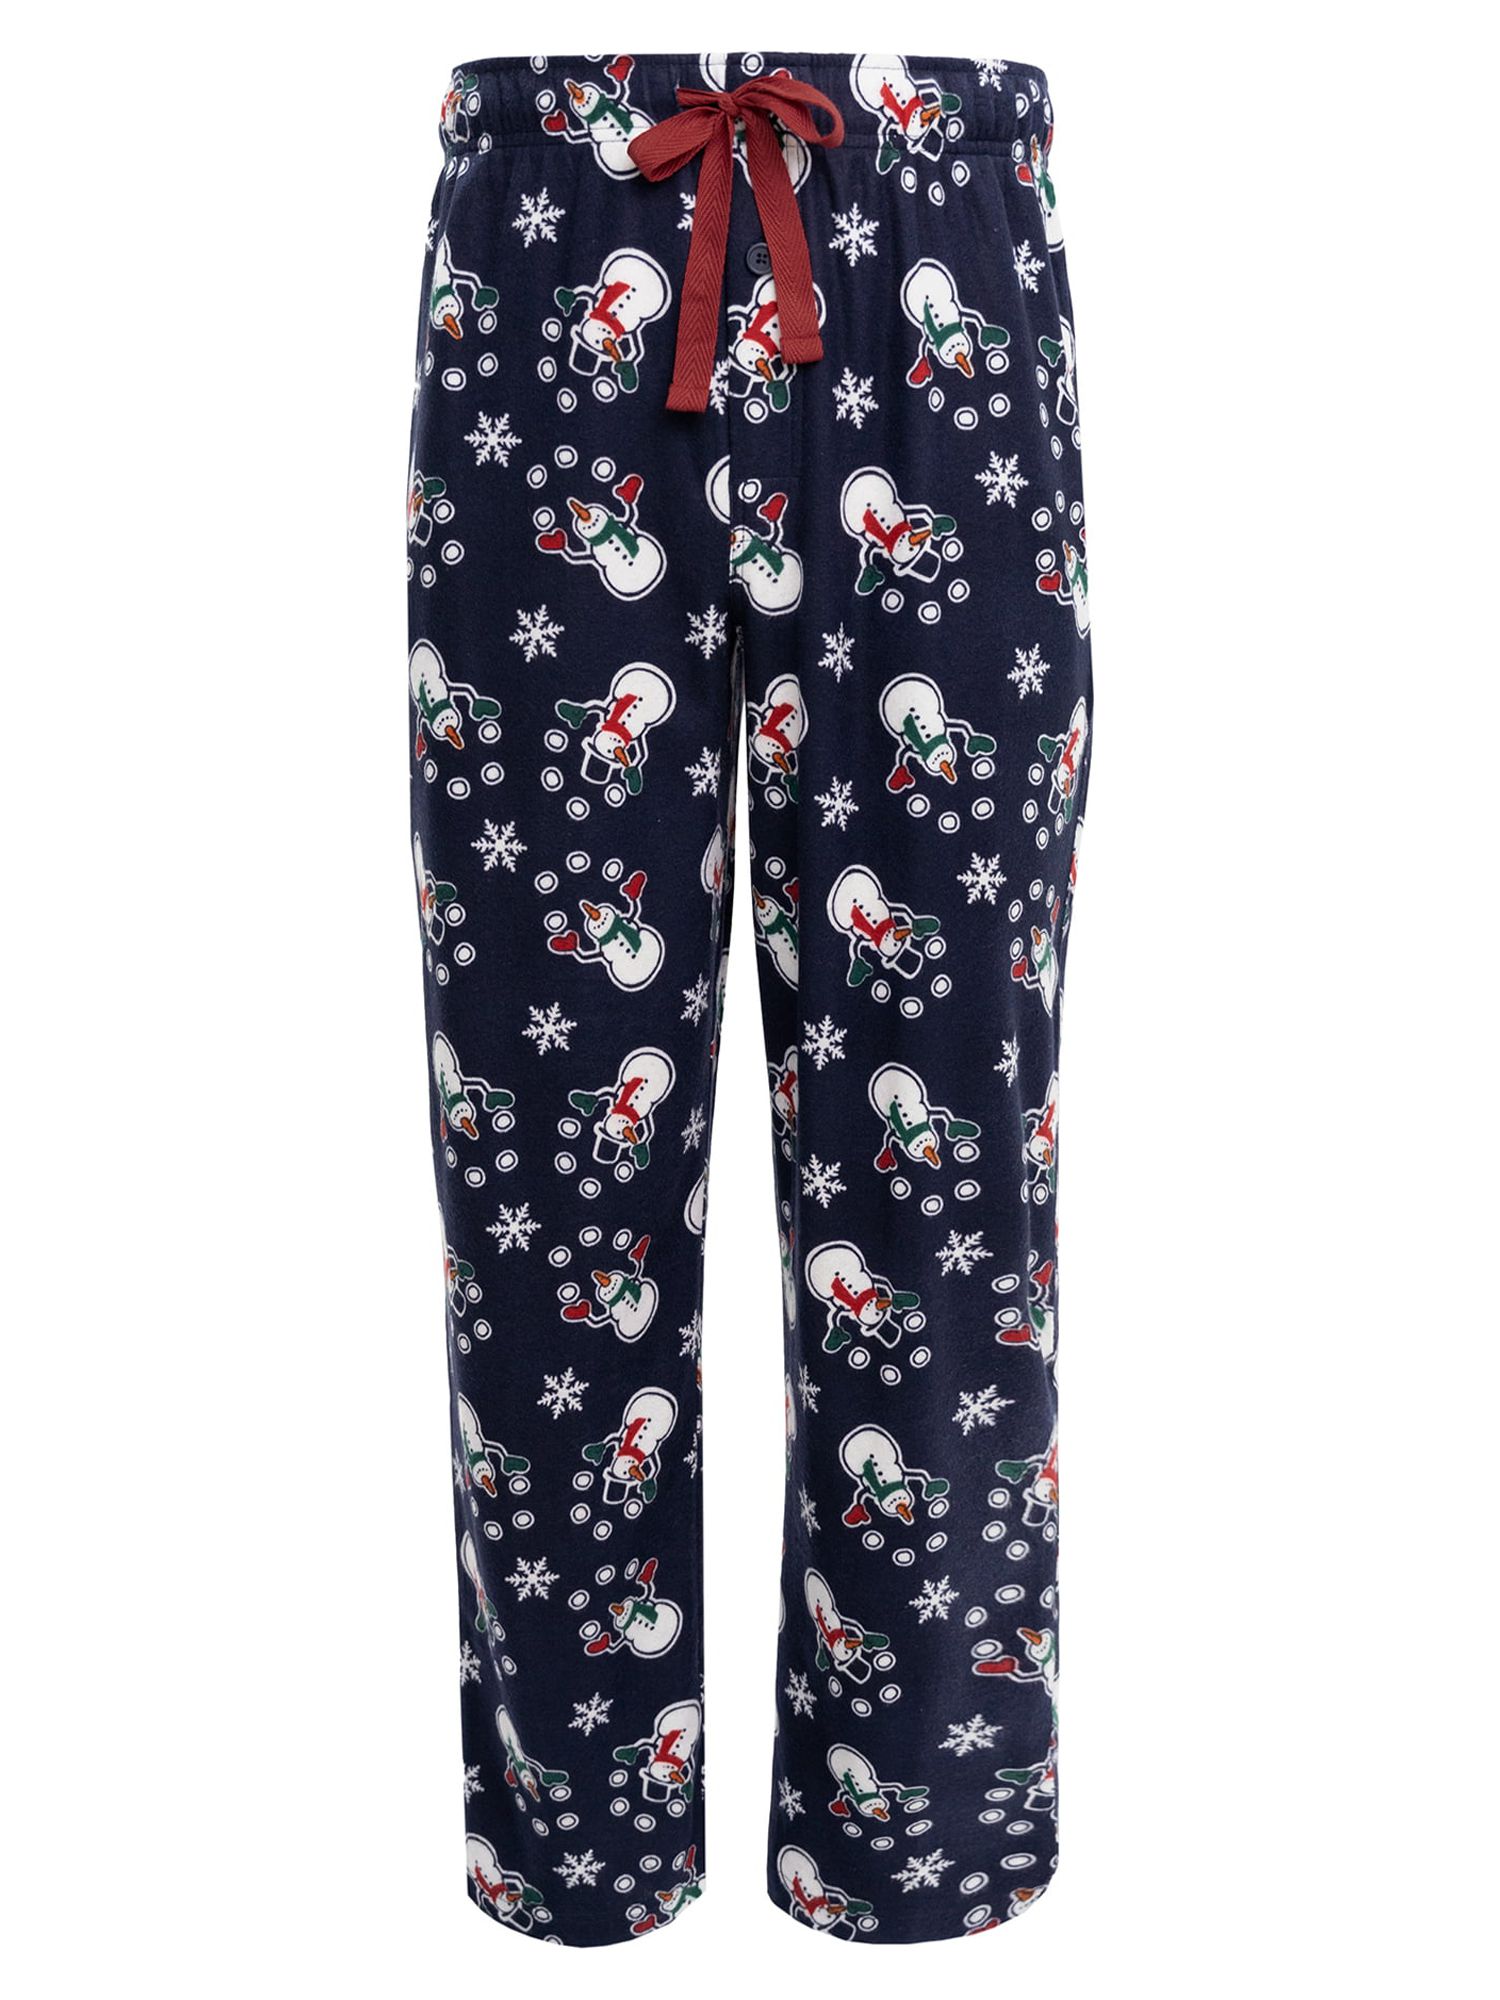 Fruit of the Loom Men's Holiday and Plaid Print Soft Microfleece Pajama Pant 2-Pack Bundle - image 5 of 15